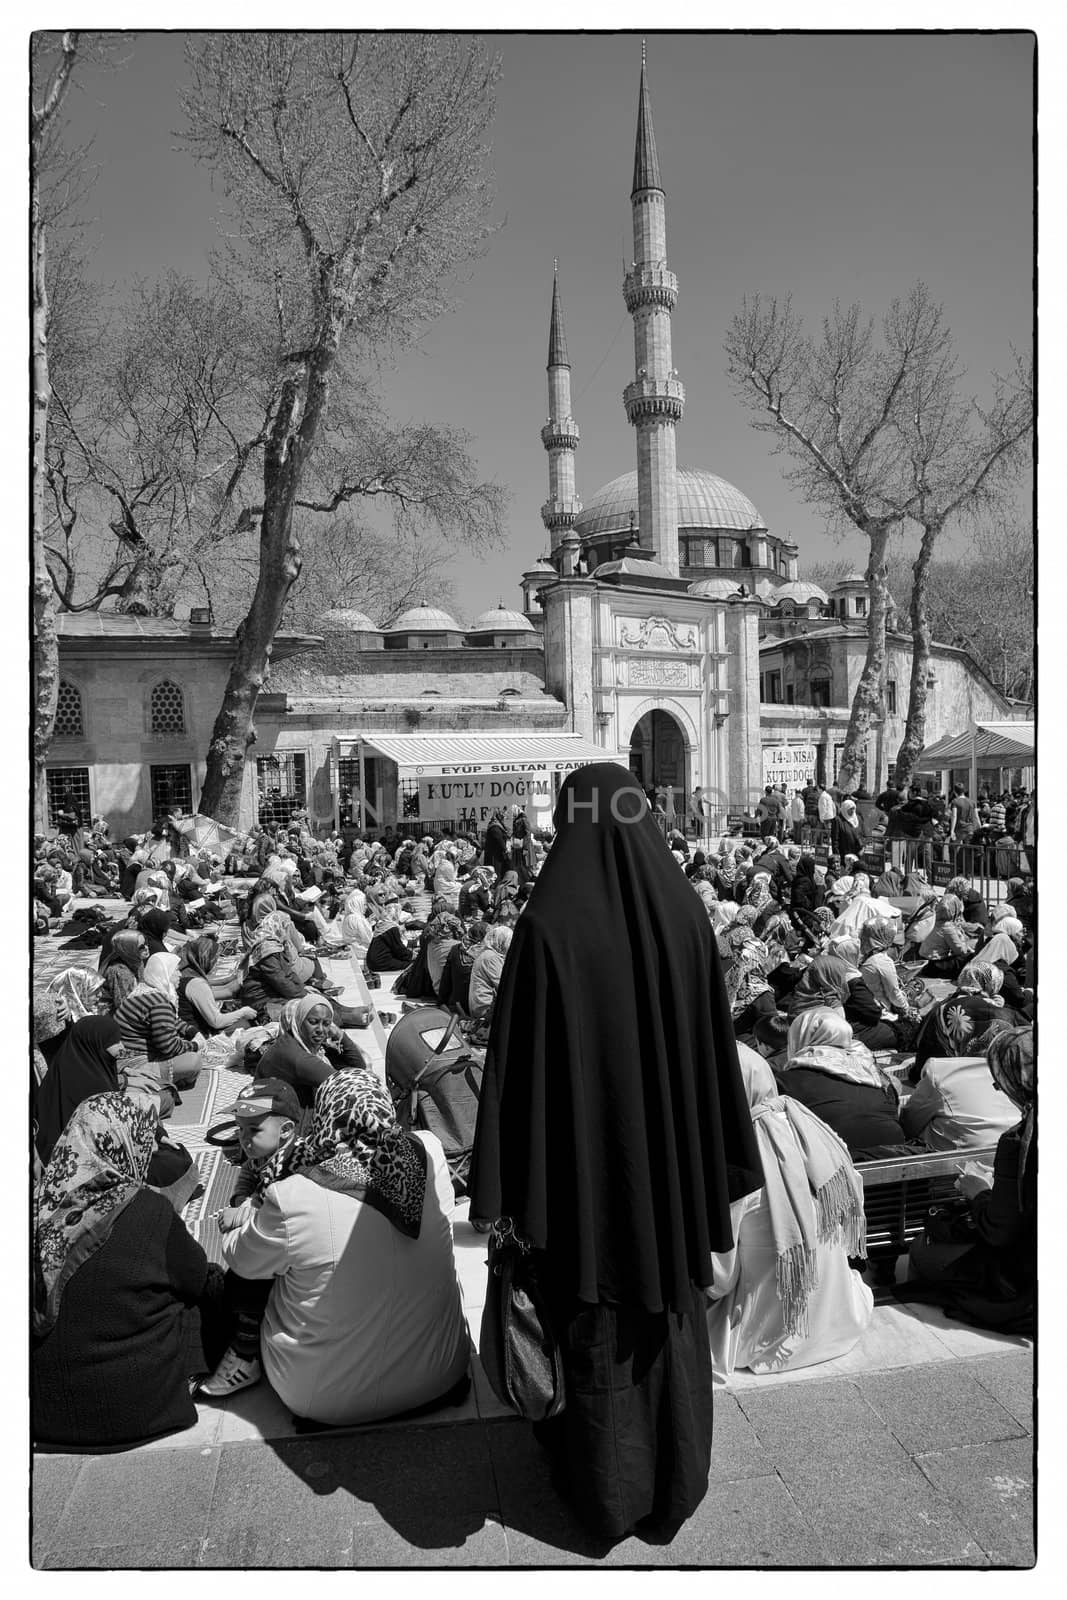 EYUP SALIM MOSQUE, ISTANBUL, TURKEY, APRIL 13, 2012: Just before the Friday prayer in front of the Eyup Salim mosque, Istanbul, Turkey. The women gathered in the sun and the men under some sunblinds.